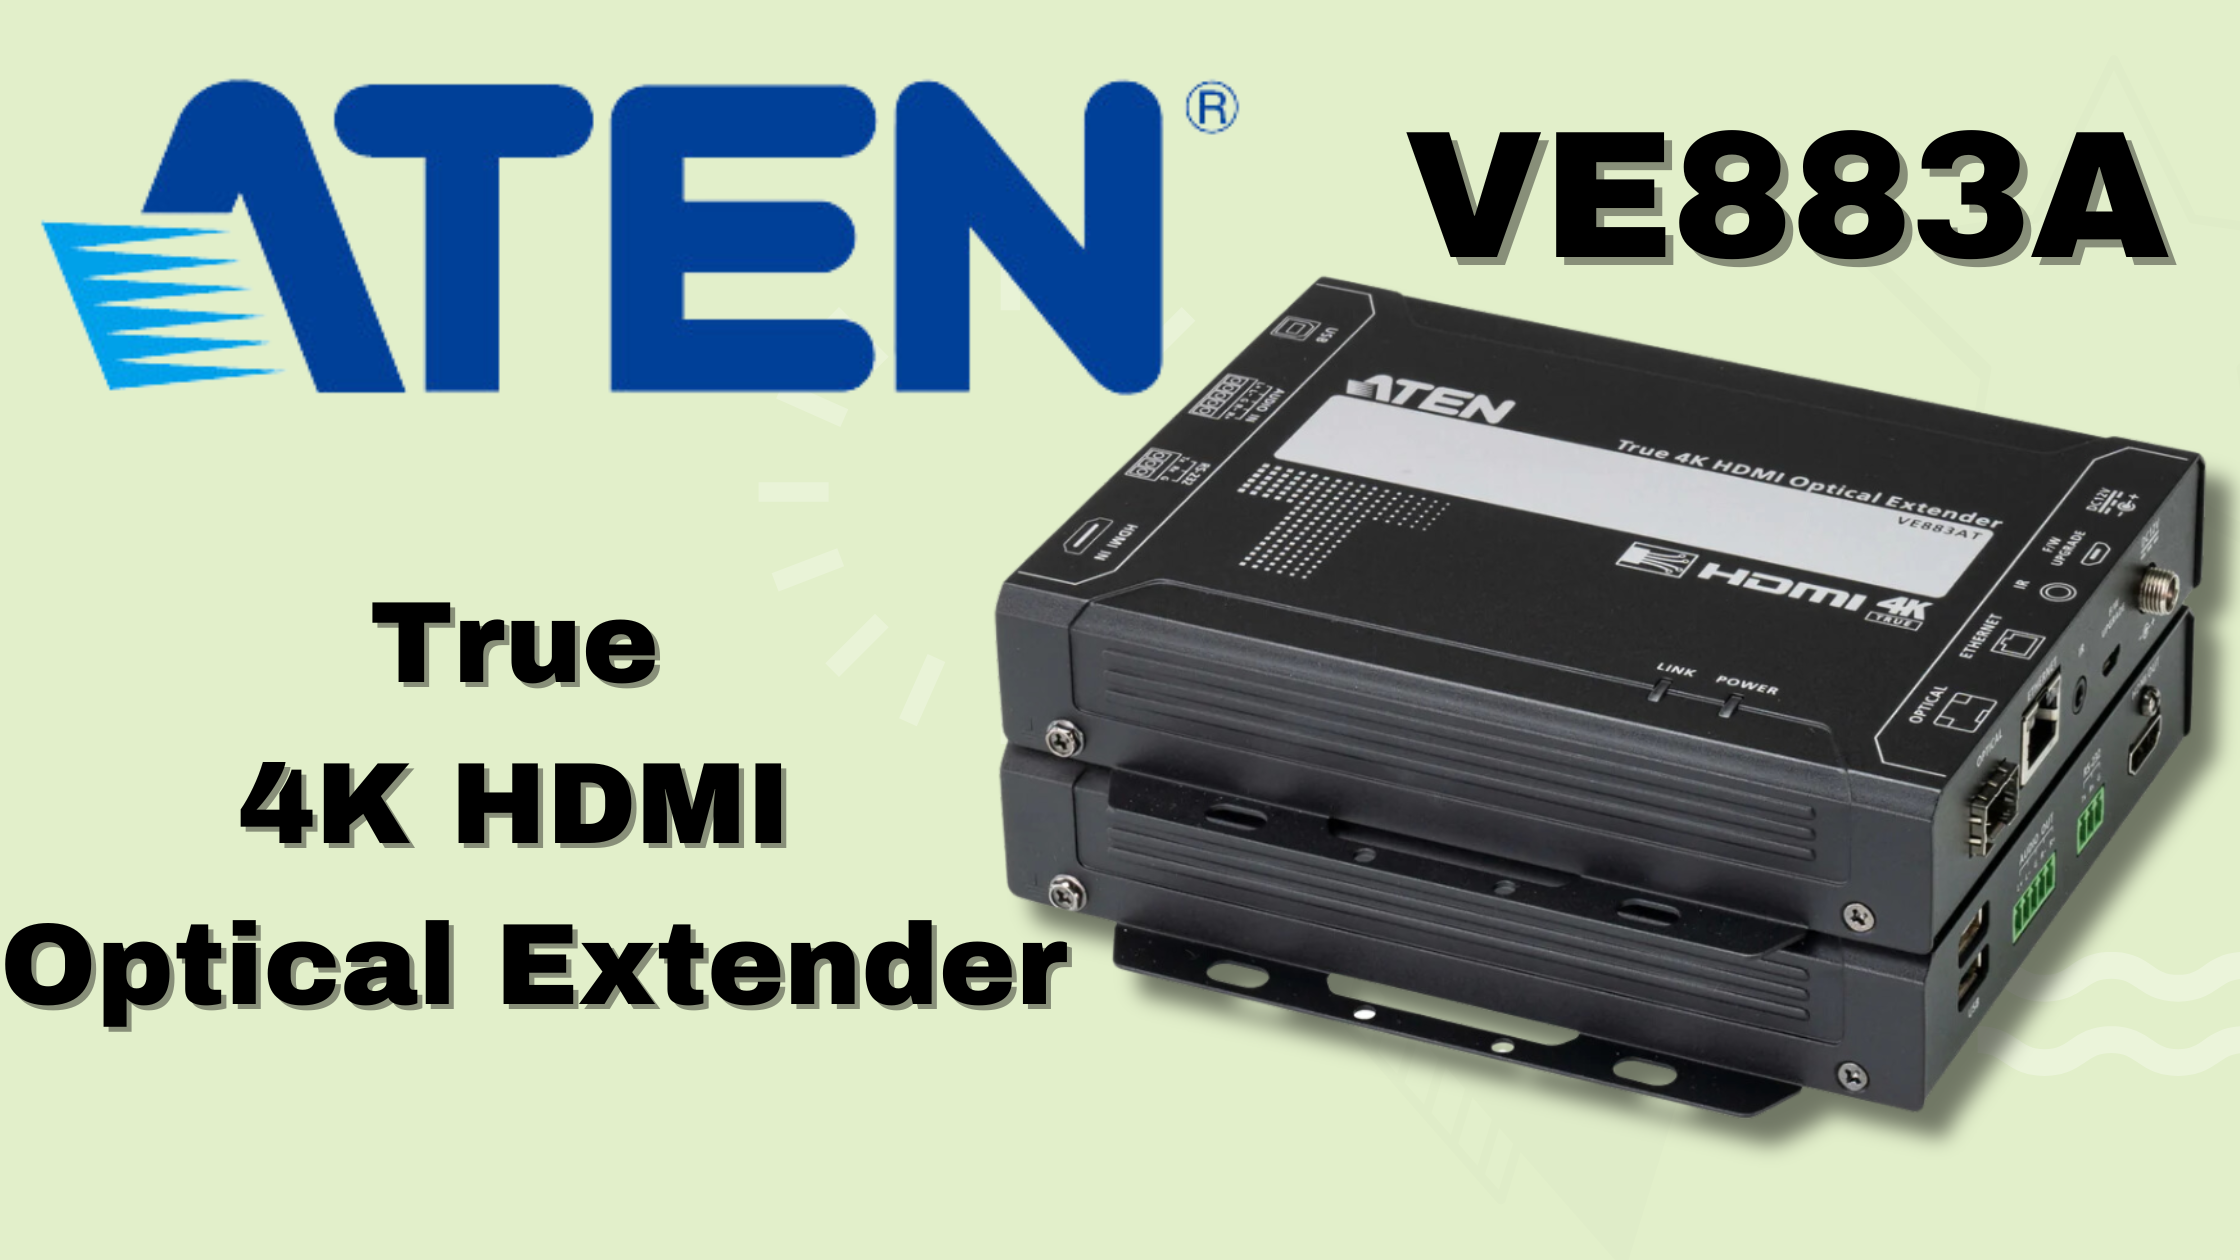 Break Through Distance Barriers: Unleash the Power of 4K with the ATEN VE883A Optical Extender